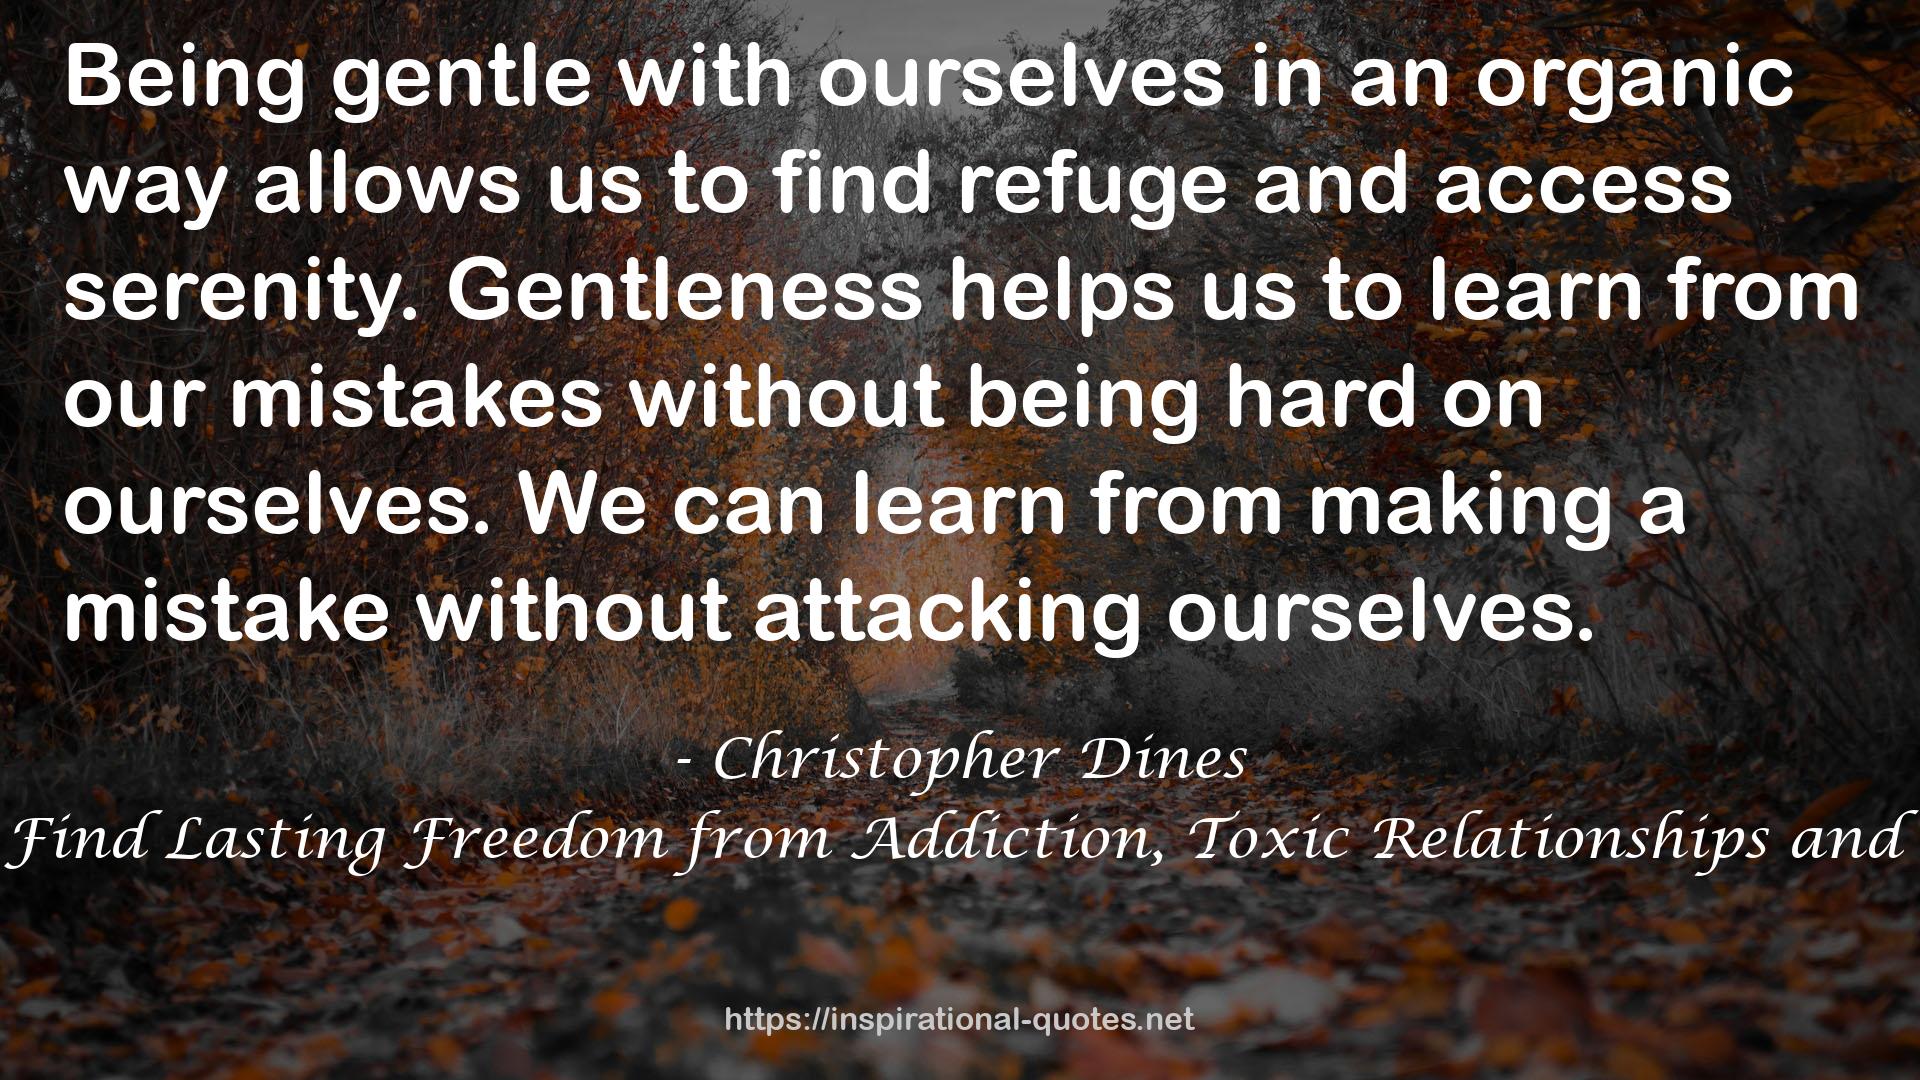 Super Self Care: How to Find Lasting Freedom from Addiction, Toxic Relationships and Dysfunctional Lifestyles QUOTES